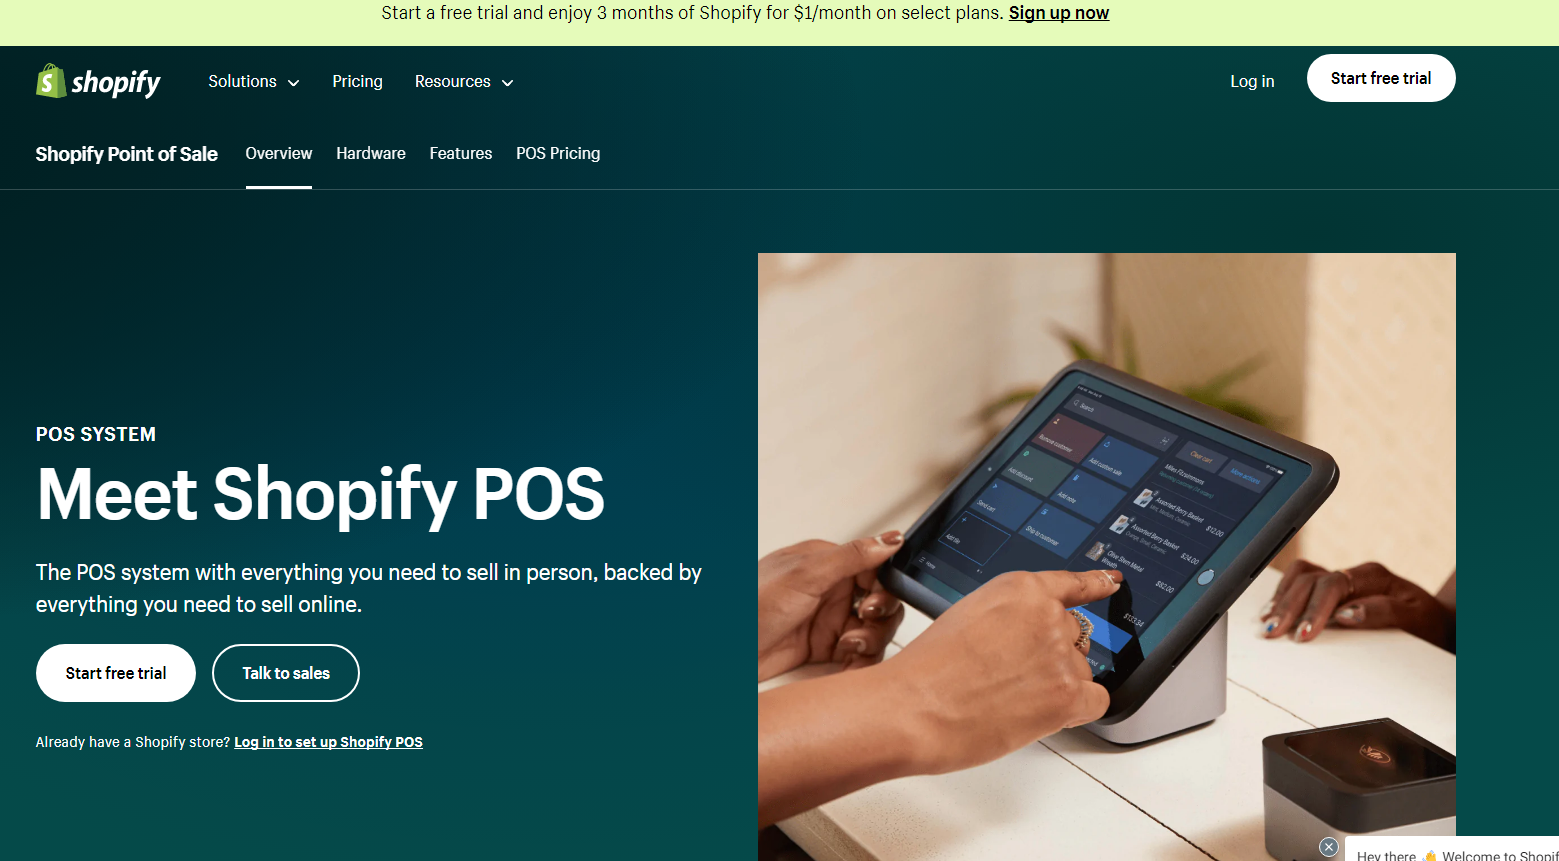 PagBrasil Offers Discount per Payment Method for Shopify and New Features